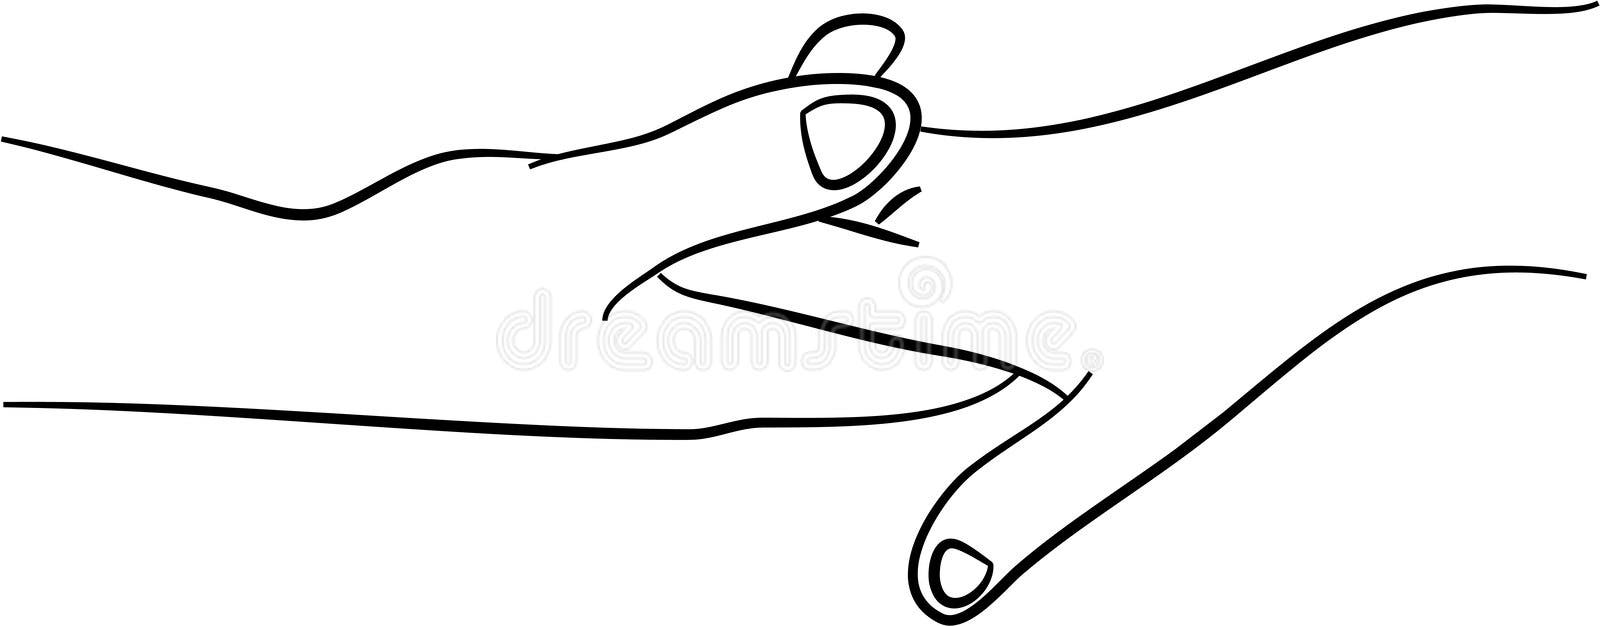 One Line Drawing Holding Hands Minimalist Design on White Background ...